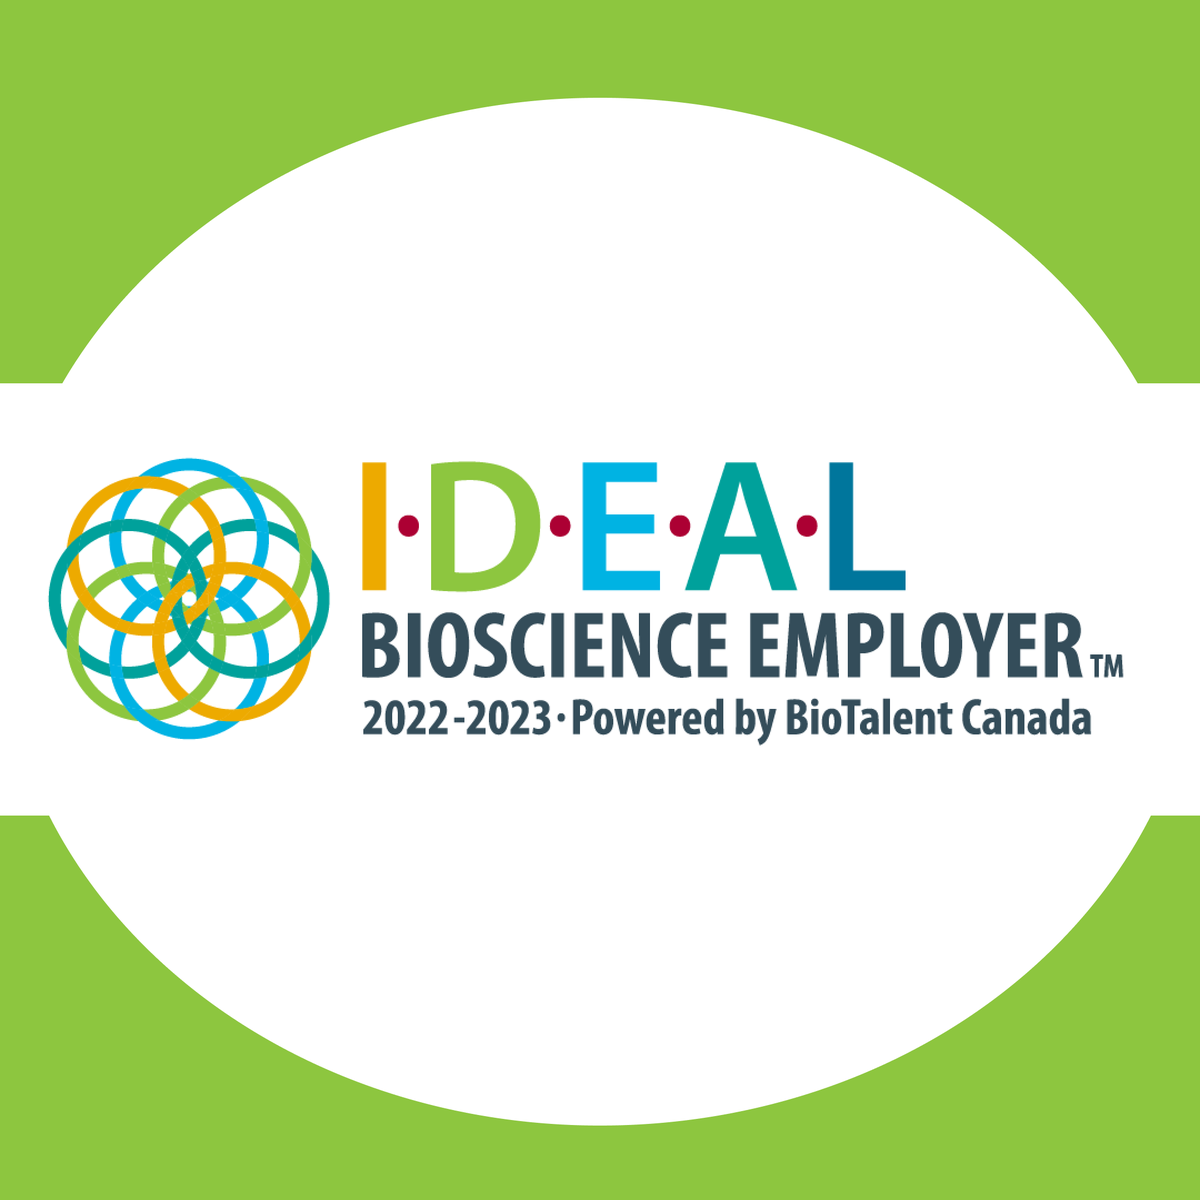 For demonstrating practices of #inclusivity, #diversity, #equity and #accessibility leadership, we have officially received from @biotalentcanada 2022-2023 I.D.E.A.L. Bioscience Employer™ Recognition. Learn more about the program at: biotalent.ca/IDEALEmployer